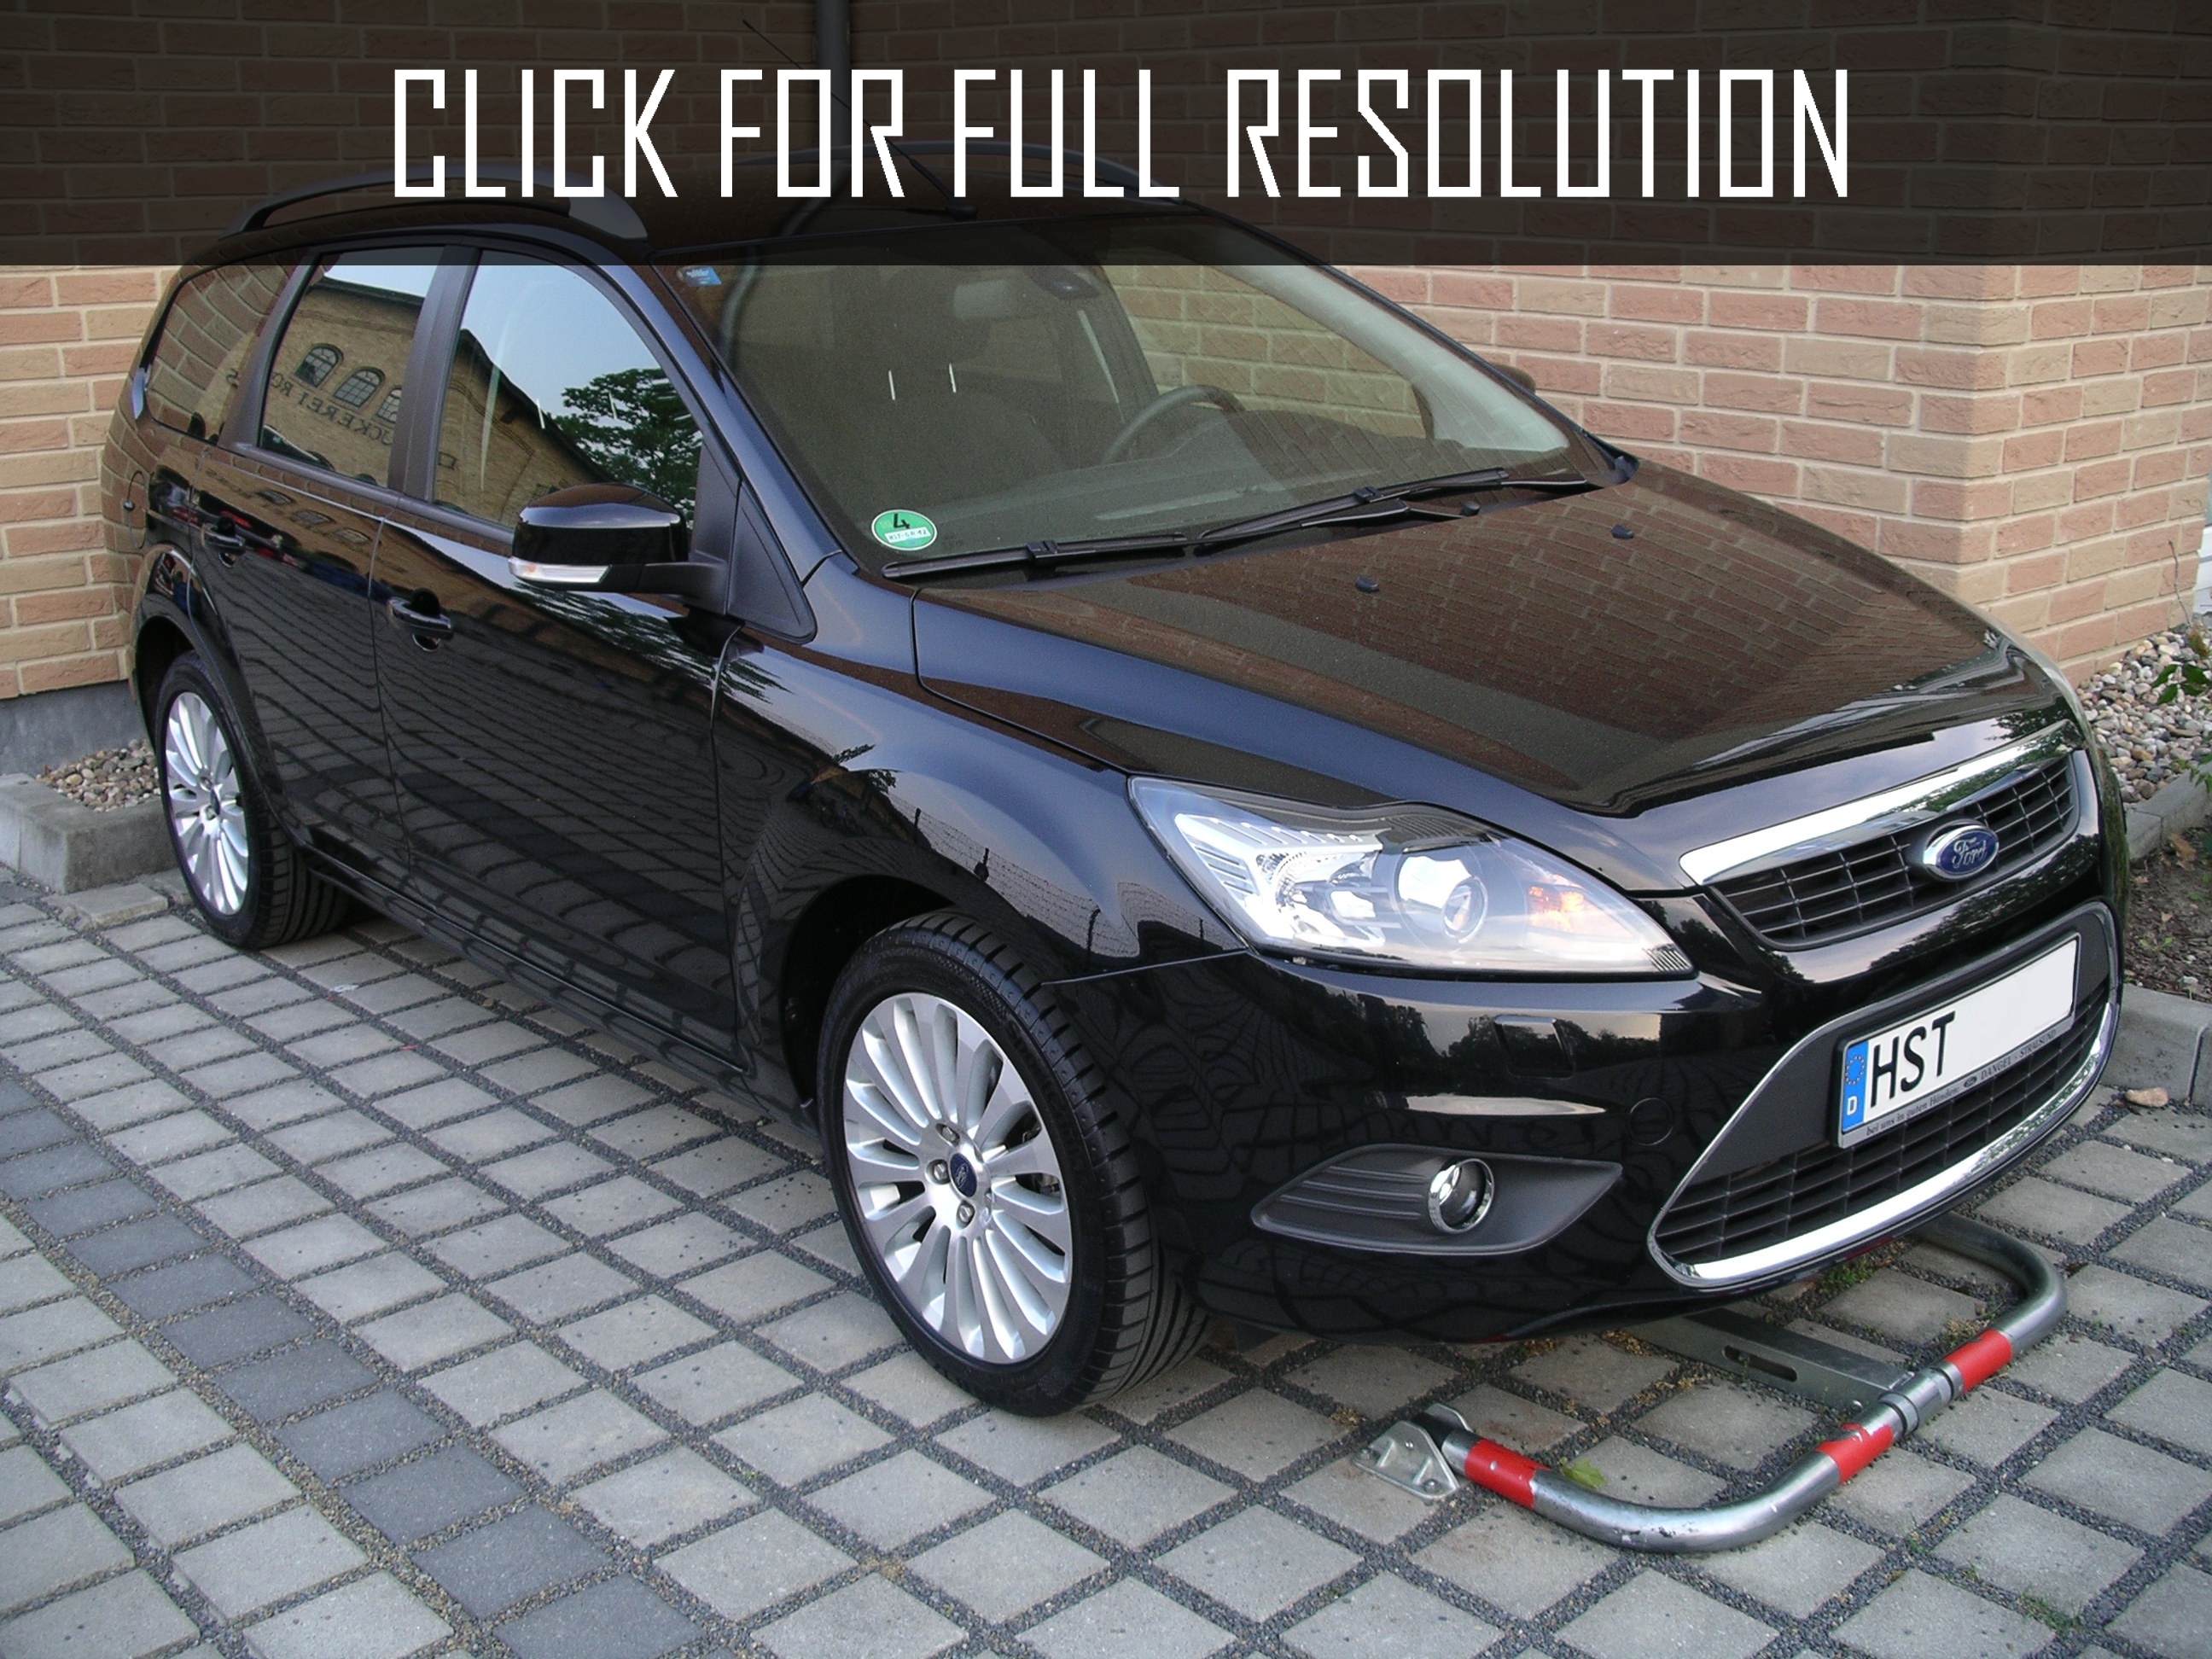 Ford Focus Turnier 1.6 Tdci amazing photo gallery, some